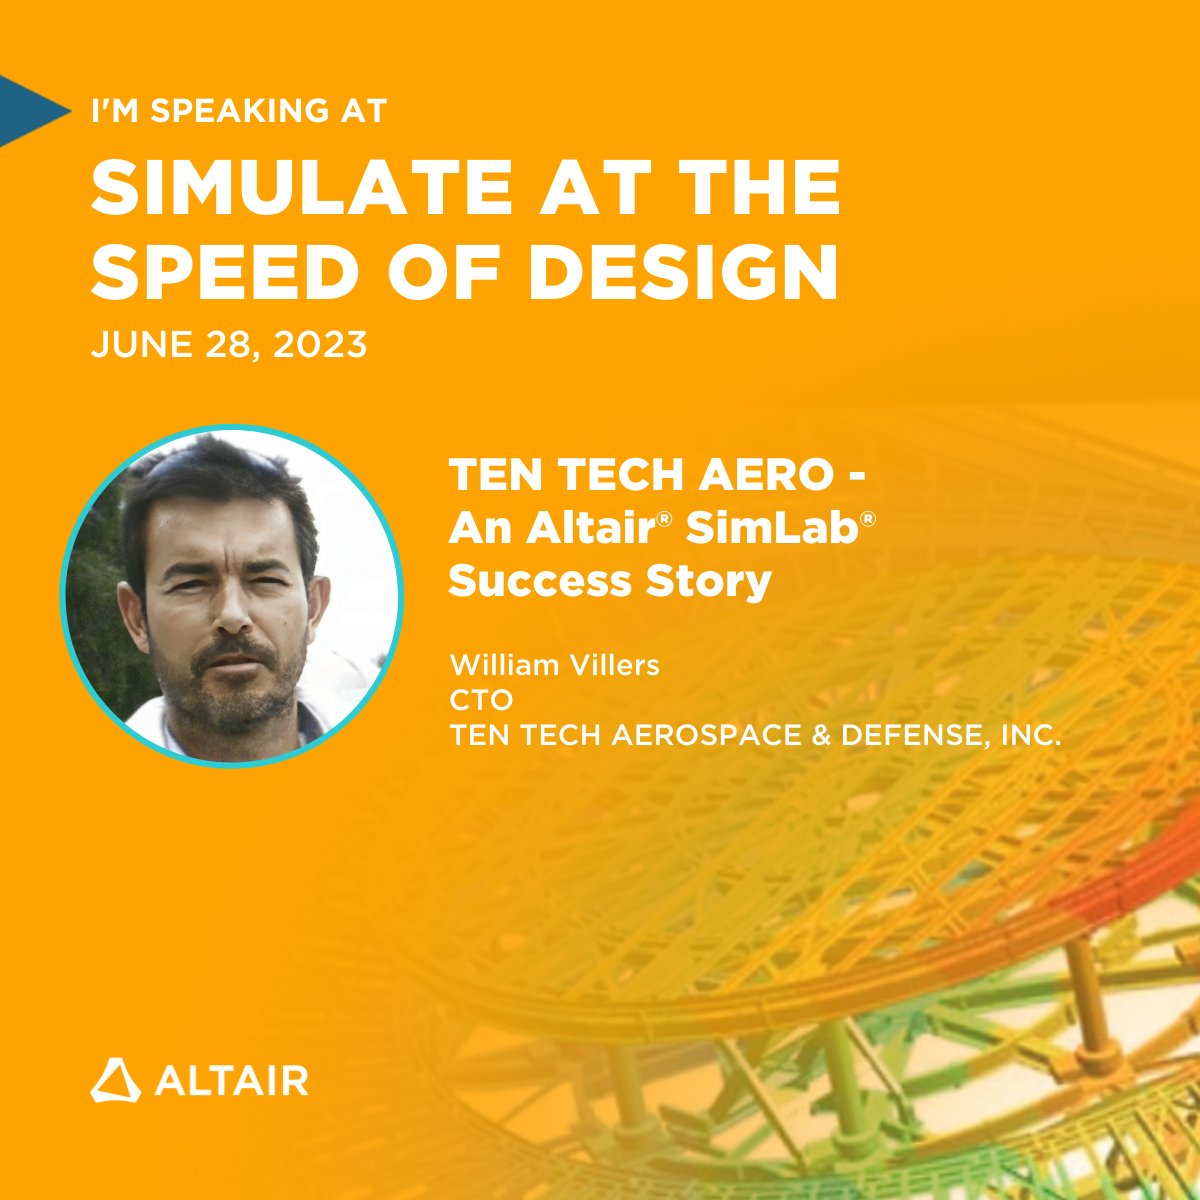 Thrilled to be presenting our success story migrating to @Altair Simlab at 'Simulate at the Speed of Design 2023' Register to attend my session, and hear from many great speakers rb.gy/u64x0 #AltairEvent #OnlyForward #AltairPartner #Simulation